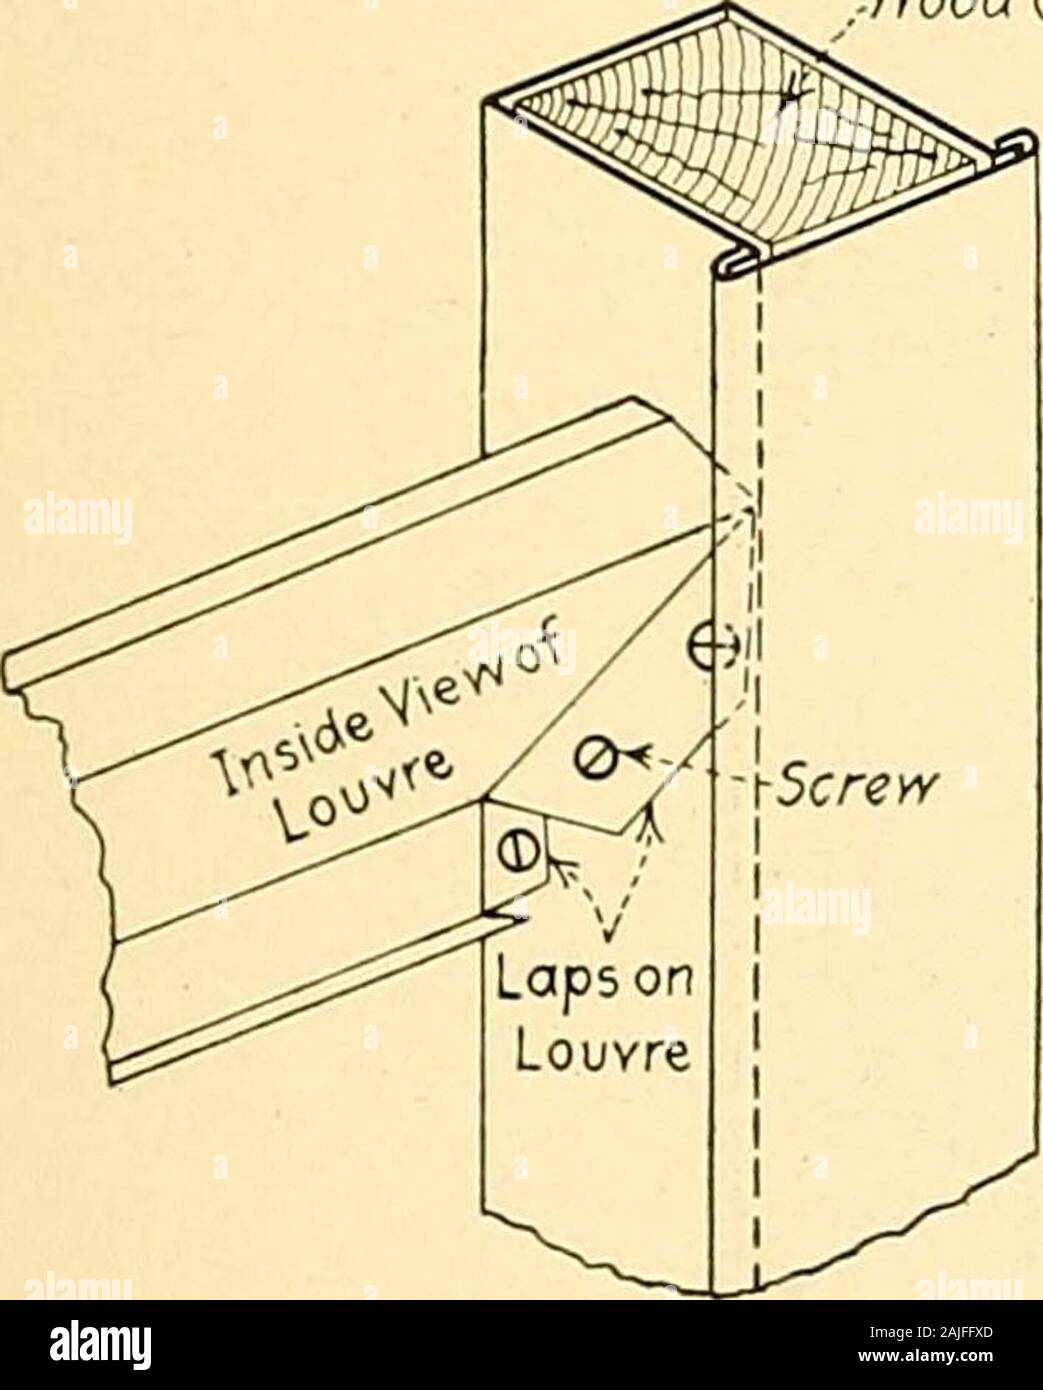 Home instruction for sheet metal workers . 6. When all is formed the curba b i, Fig. 414, is set together square, after which the corner postsb c and a d, and the middle post c f are soldered to the curb atright angles to a b. Care must be taken that these posts are setperfectly square to the base, otherwise the louvres will not fit. Construction of Stationary and Movable Louvres 293 The laps on the stationary louvres are then turned at right anglesand soldered to the sides of the post. Sometimes, instead of soldering the louvres against the post,ing, the posts have wood cores, to which the lo Stock Photo